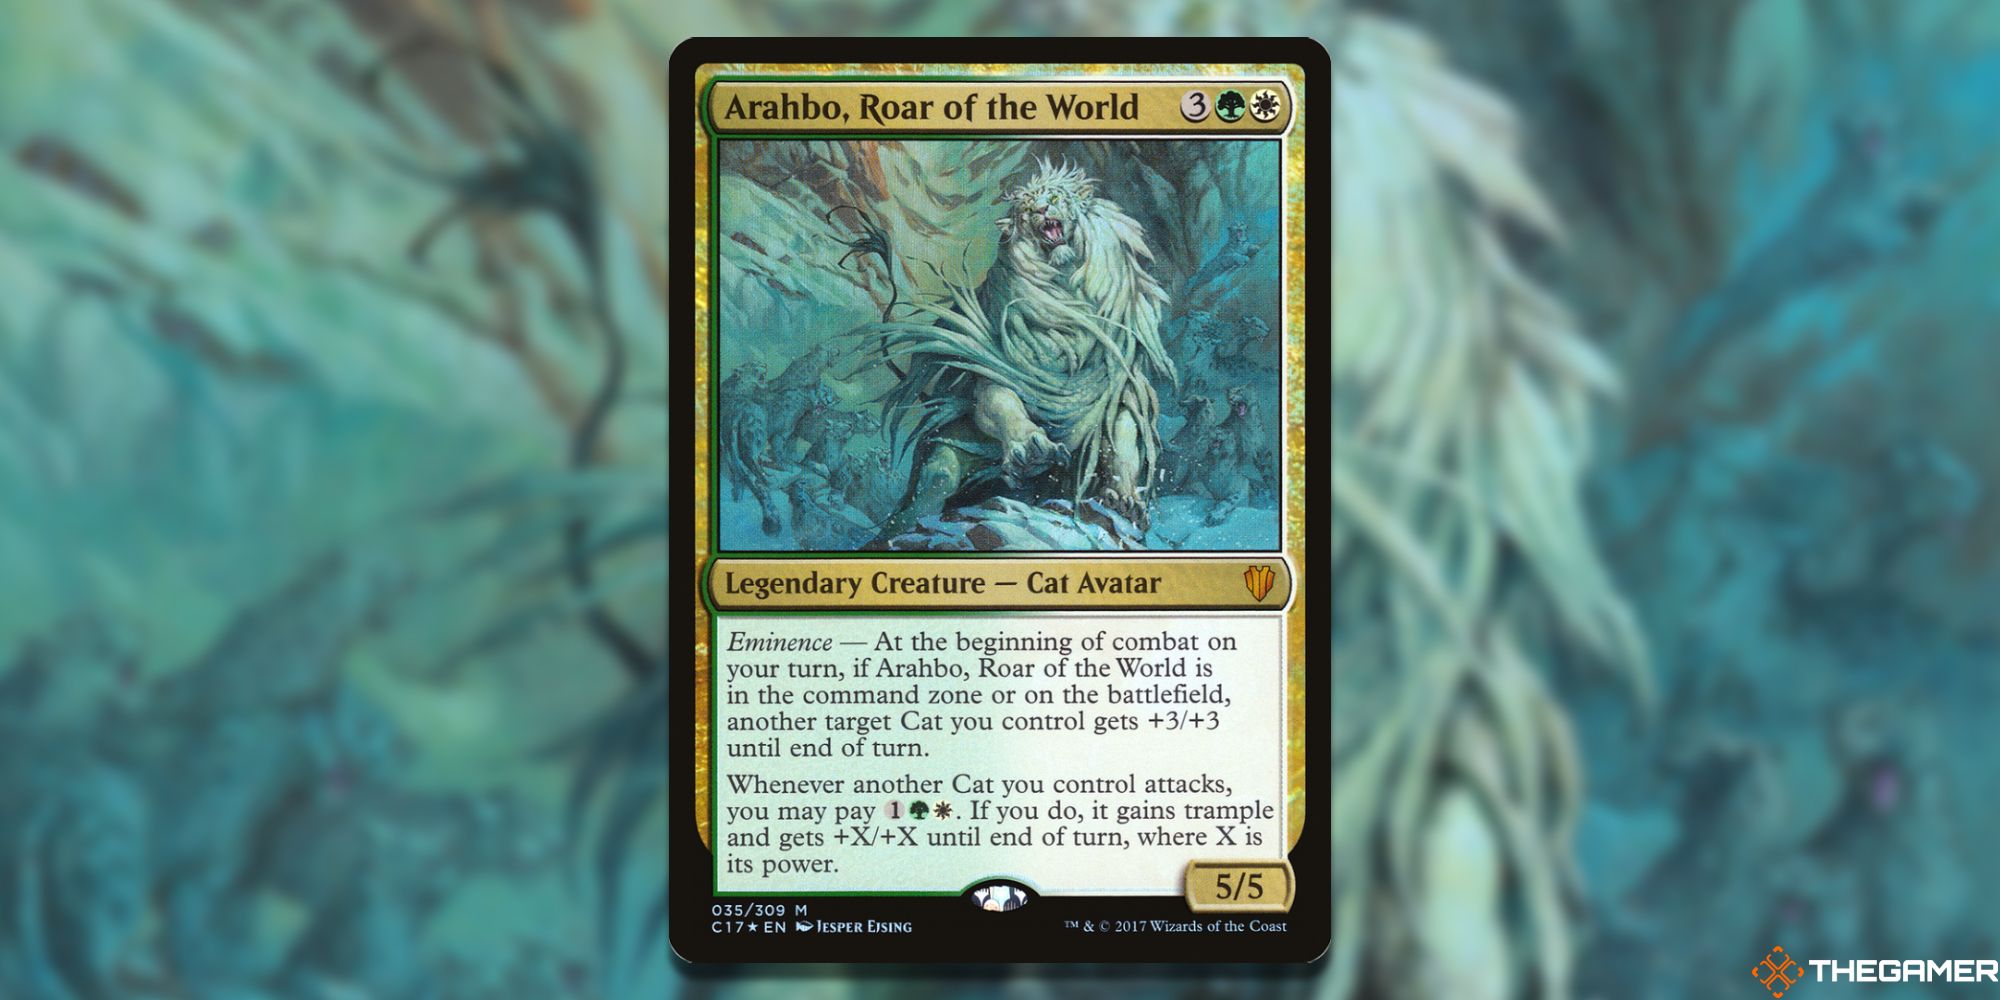 Image of the Arahbo, Roar of the World card in Magic: The Gathering, with art by Jesper Eising